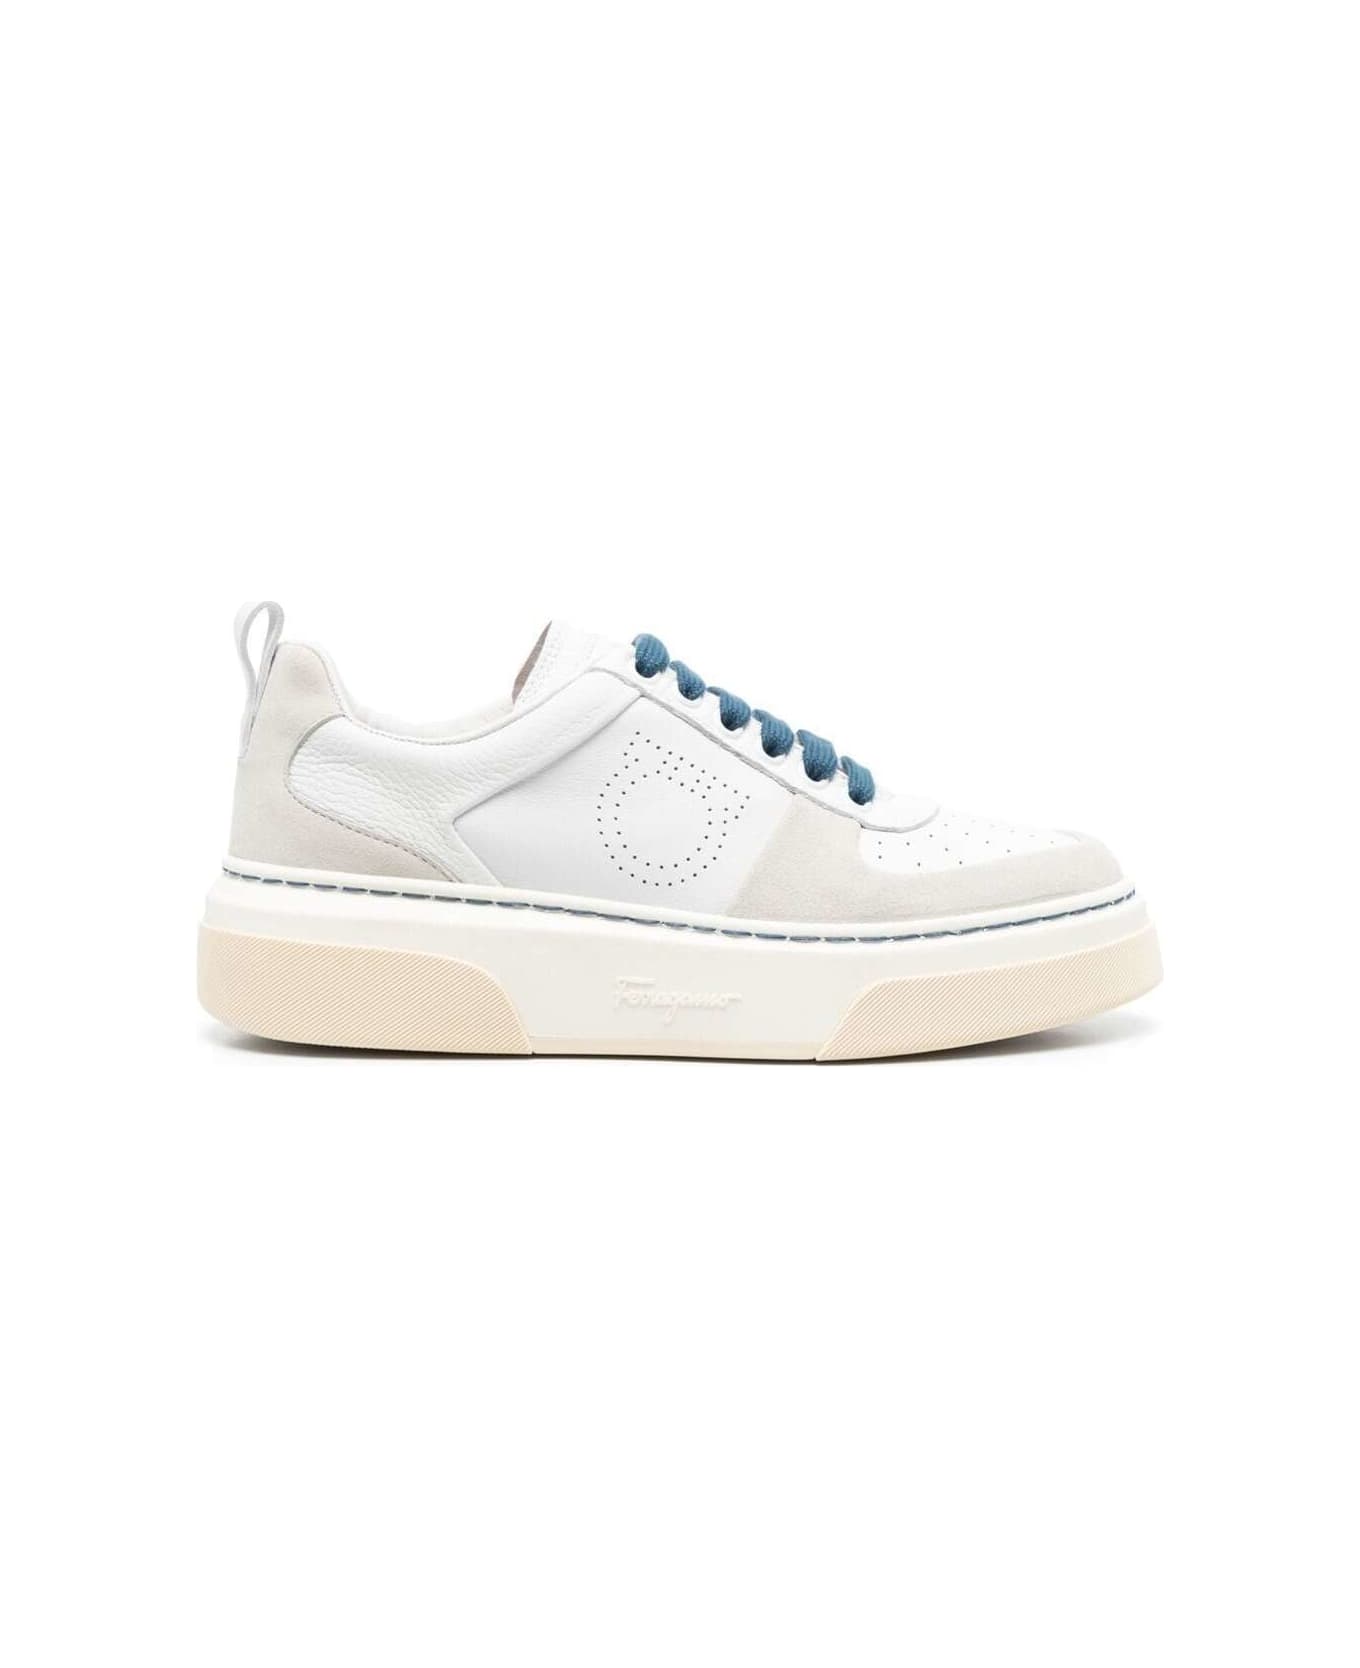 Ferragamo White Cassina Low Top Sneakers In Suede Leather Woman - White